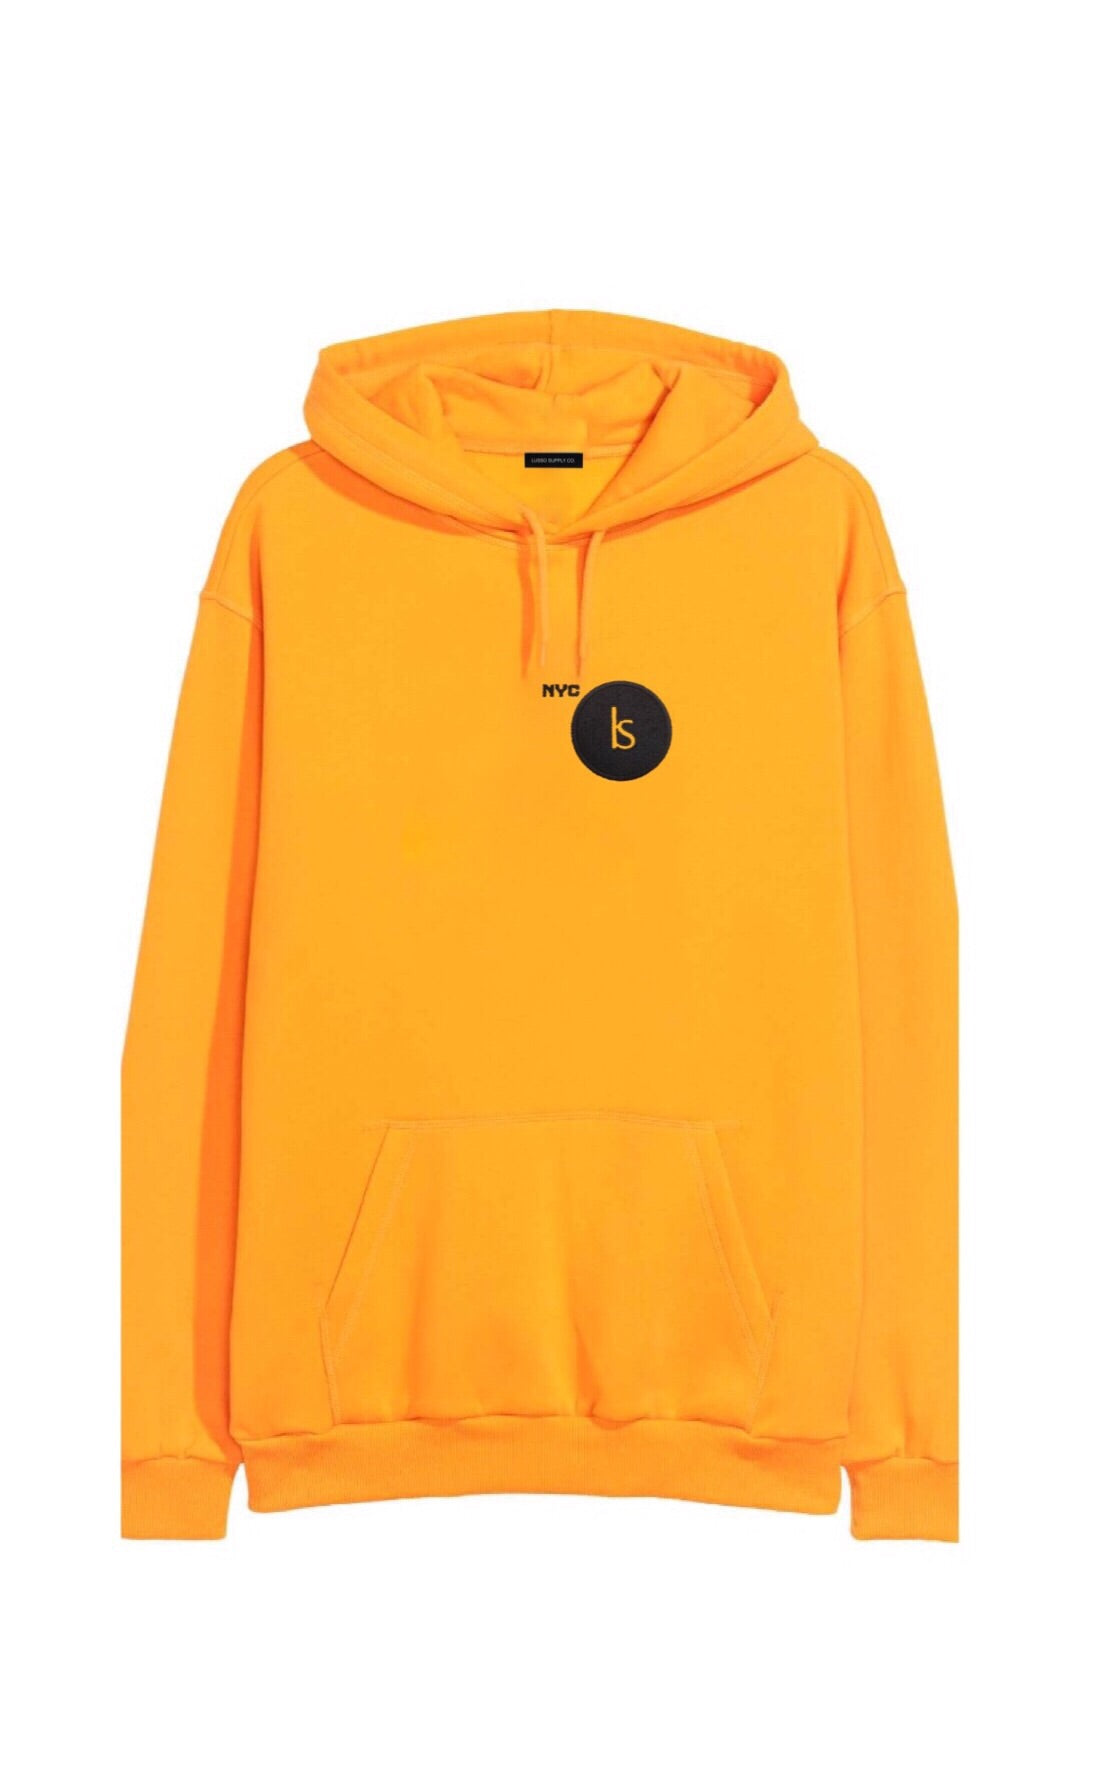 NY5 Byway Hoodie (NYC TAXICAB YELLOW) Limited Edition